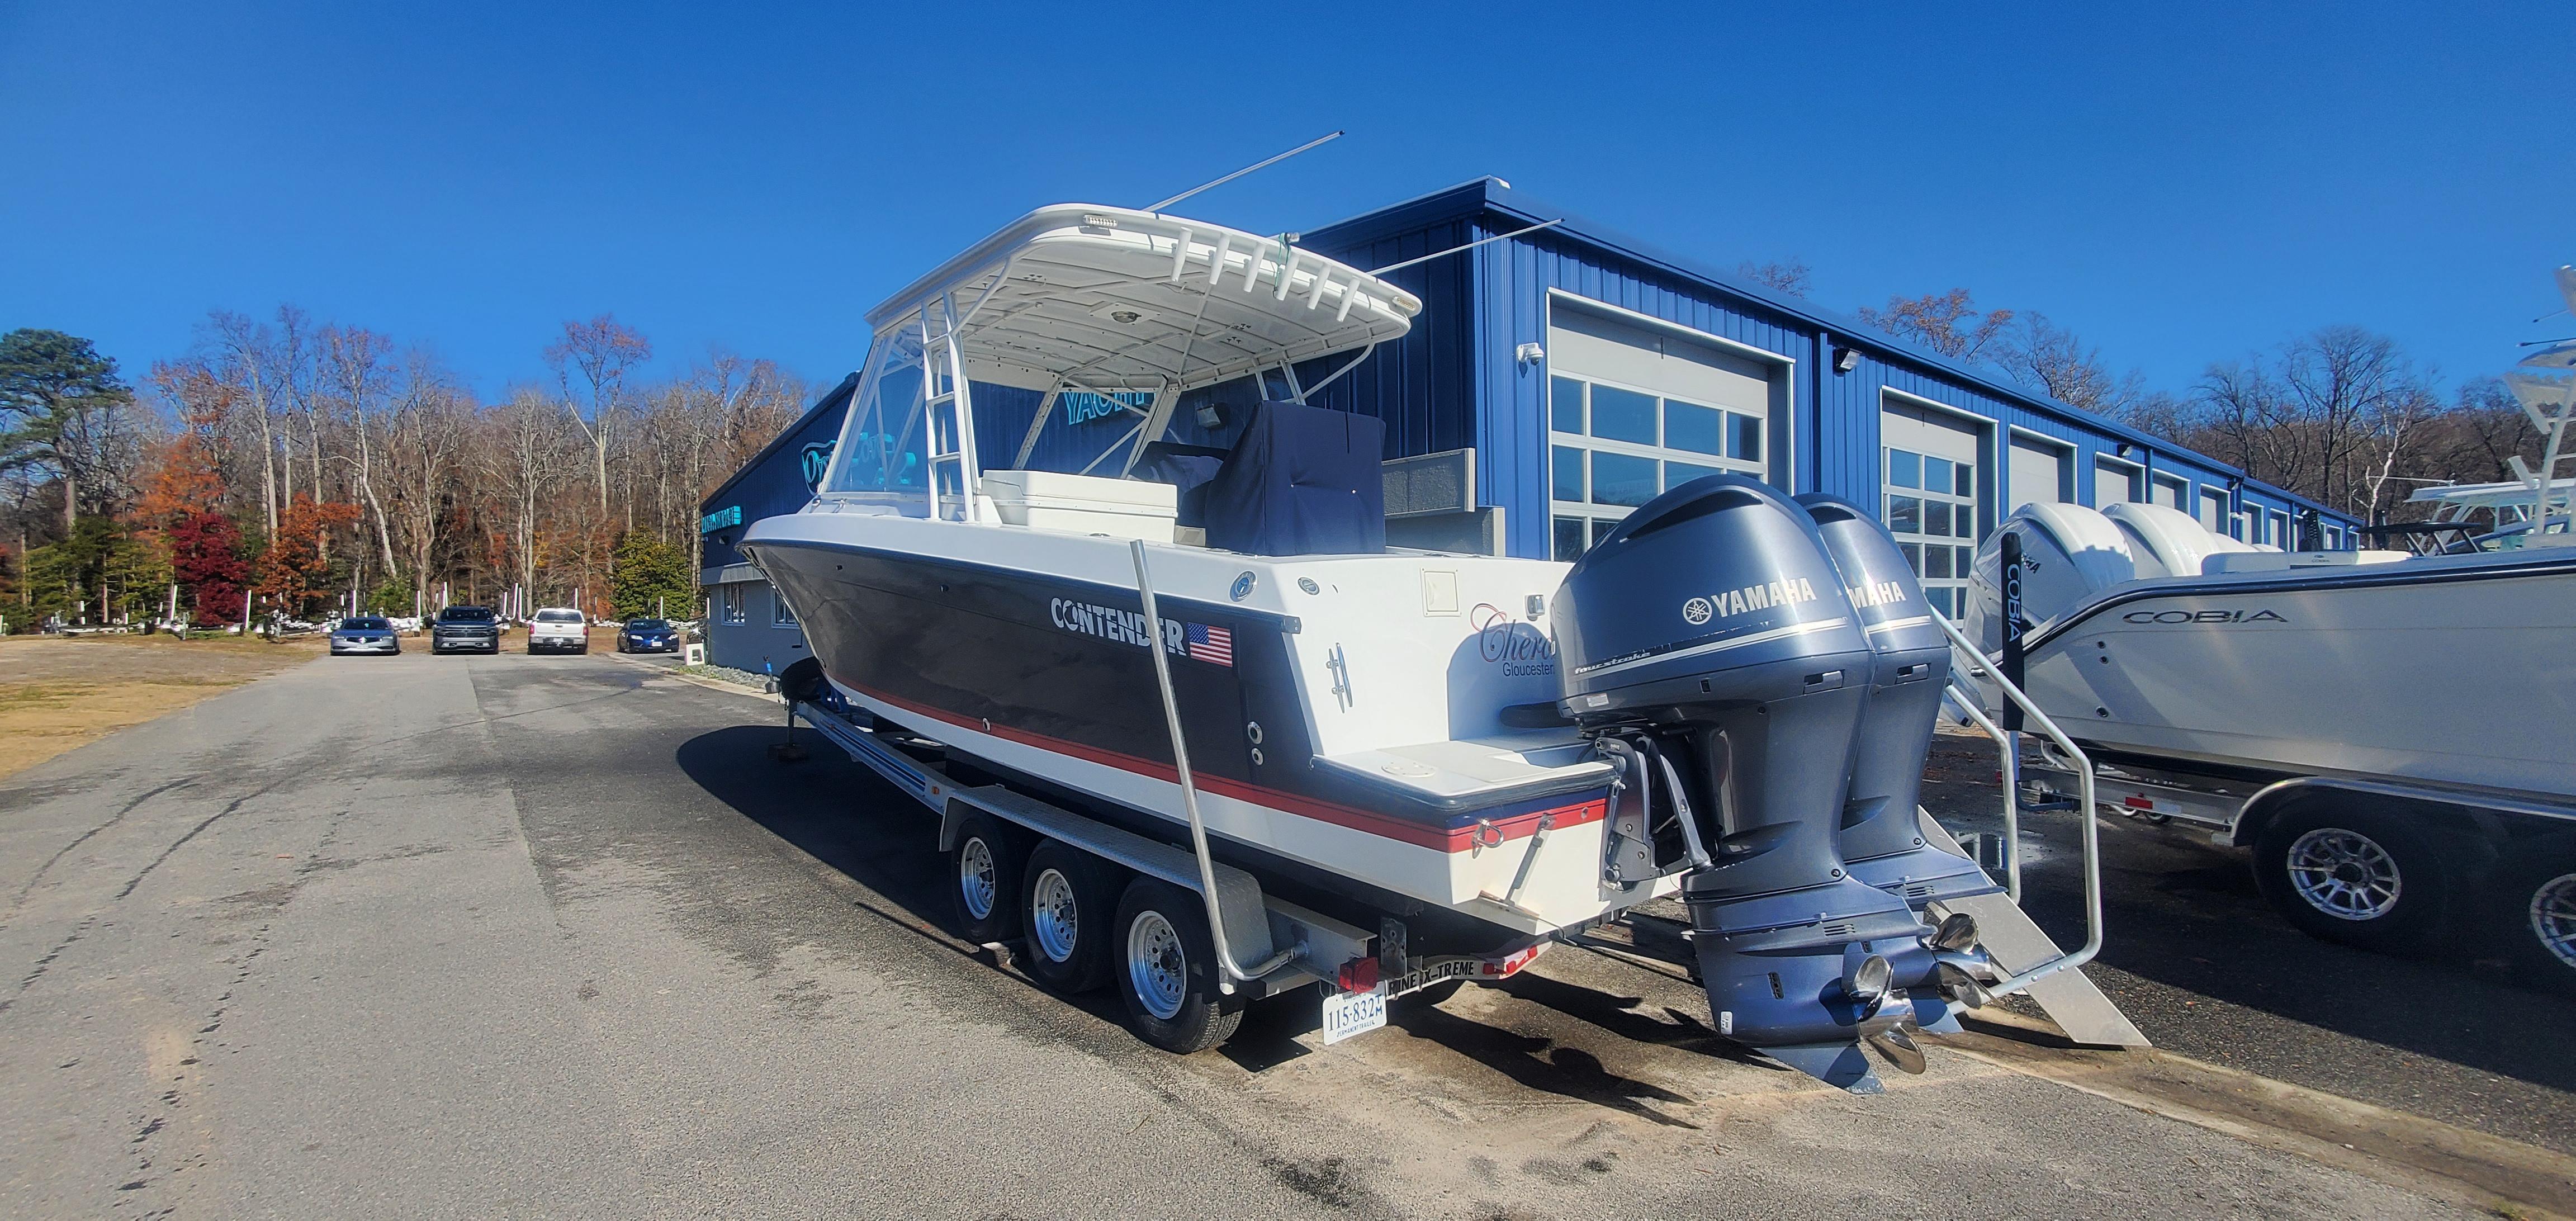 1997 Contender 35 Express Side Console Express Cruiser for sale